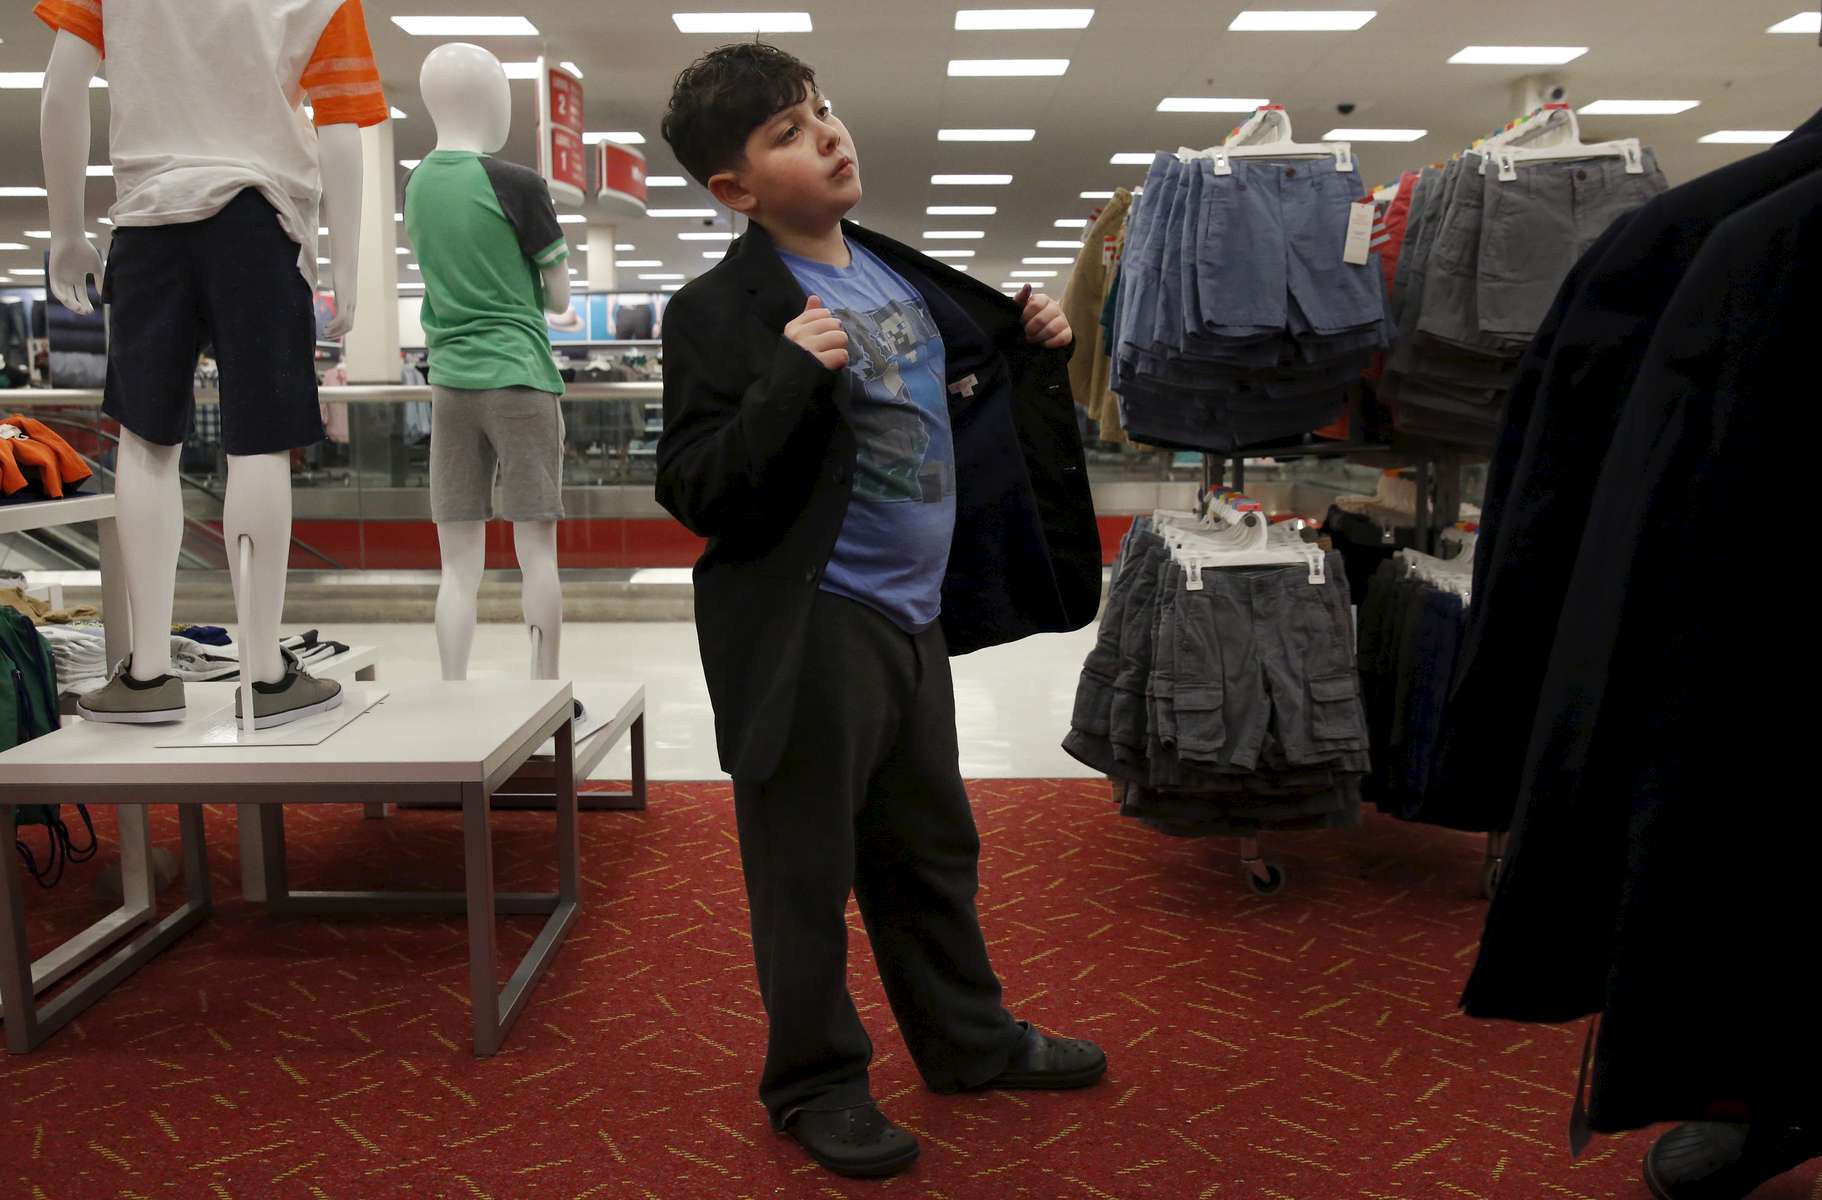 James Kaplan, 9, puts on a cool guy persona while trying on a new blazer during a shopping trip to Target for new clothes Feb. 17, 2017 in Berkeley, Calif. James vividly remembers the first time he went shopping with his mother in the boy's section of the store, it was an experience he had only dreamed about before he came out.